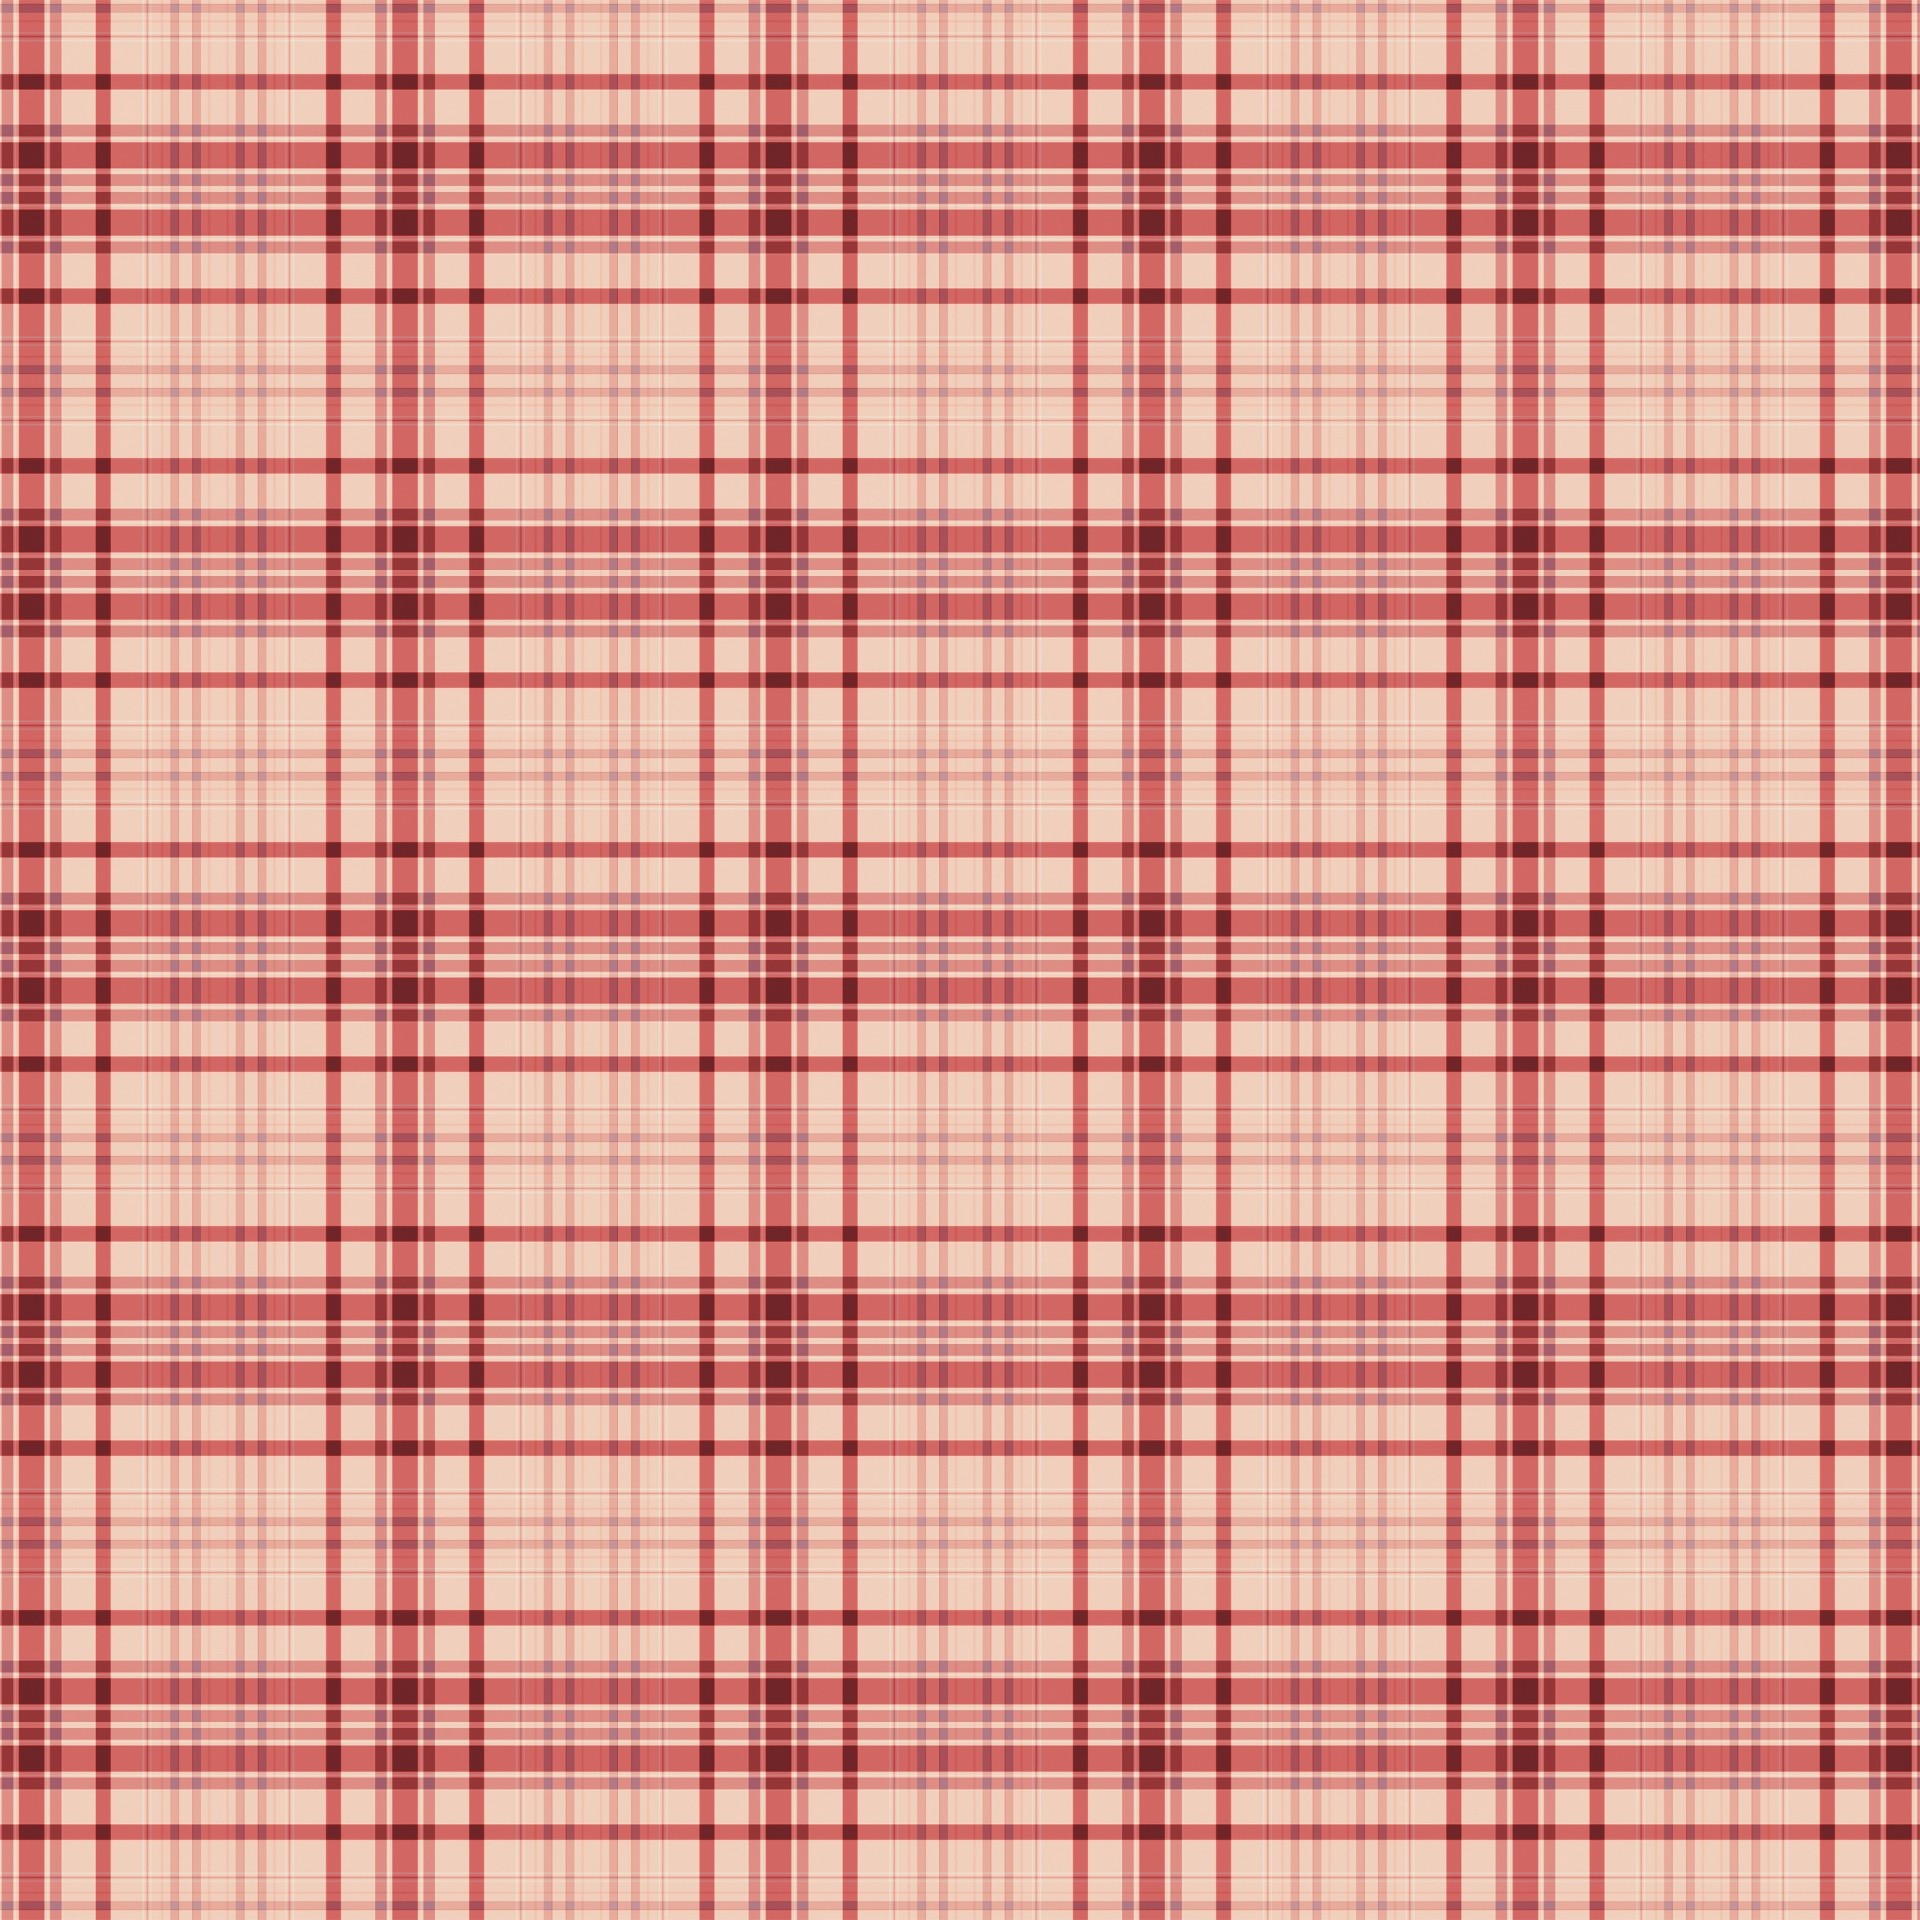 1920x1920 Check Background Red Plaid.